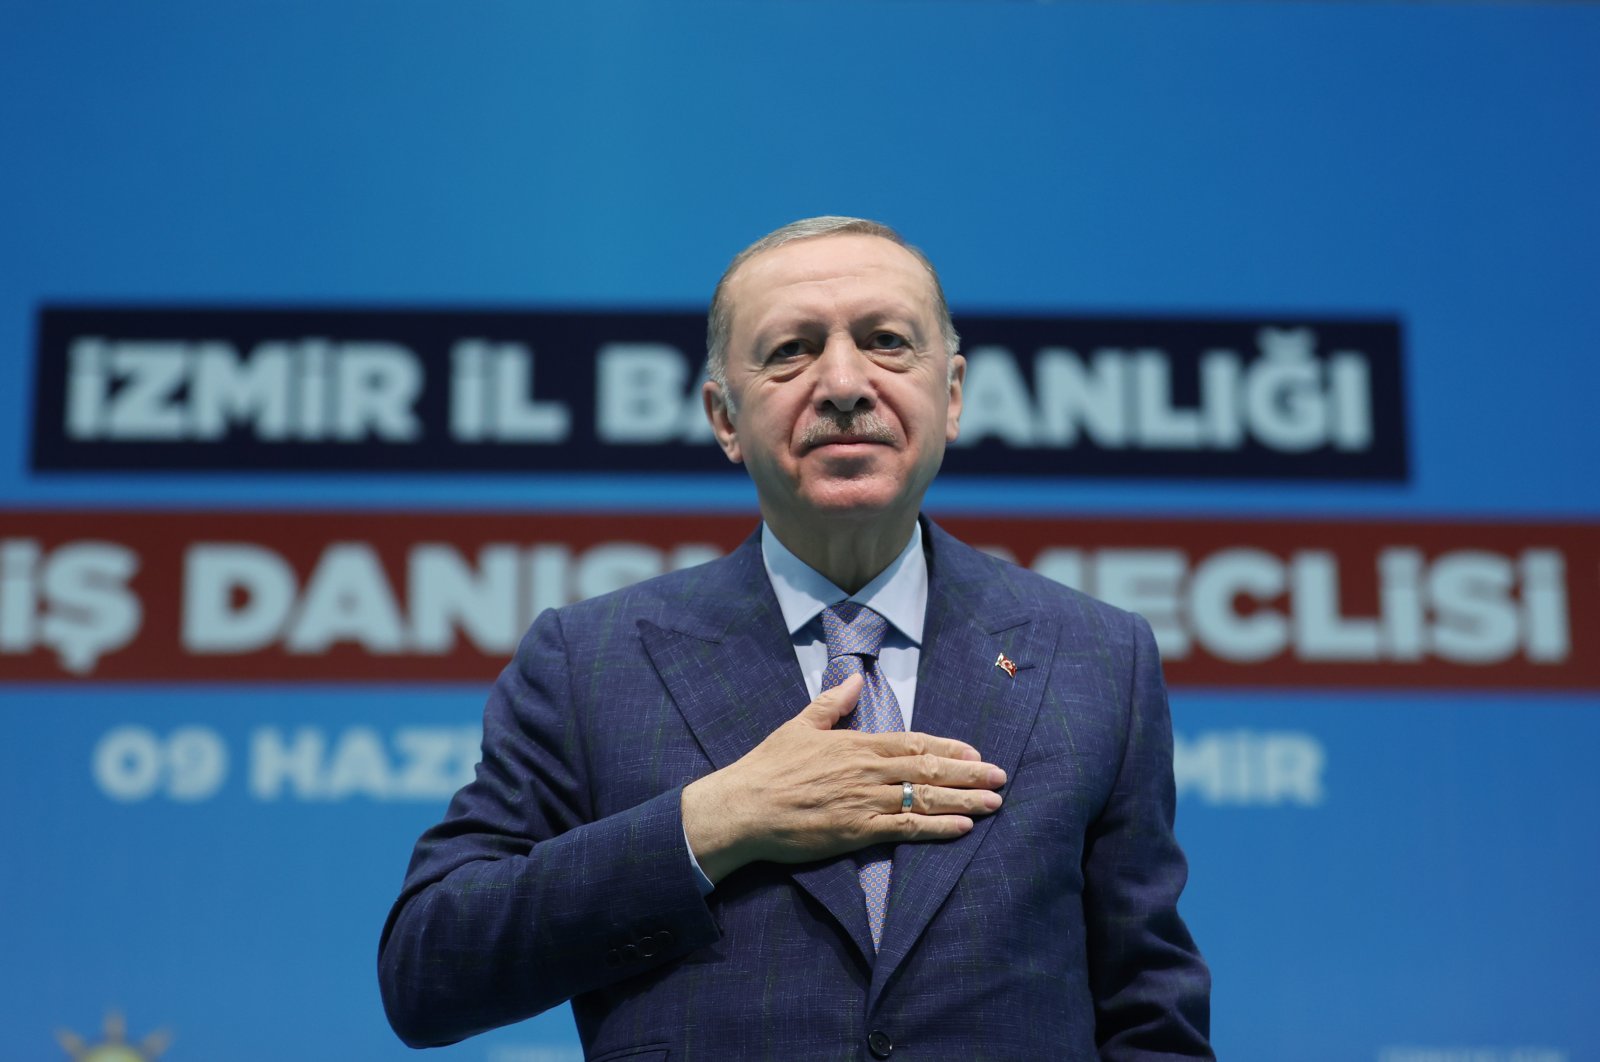 President Recep Tayyip Erdoğan salutes his ruling Justice and Development Party (AK Party) followers during a meeting in western Izmir province, Turkey, June 9, 2022. (DHA Photo)